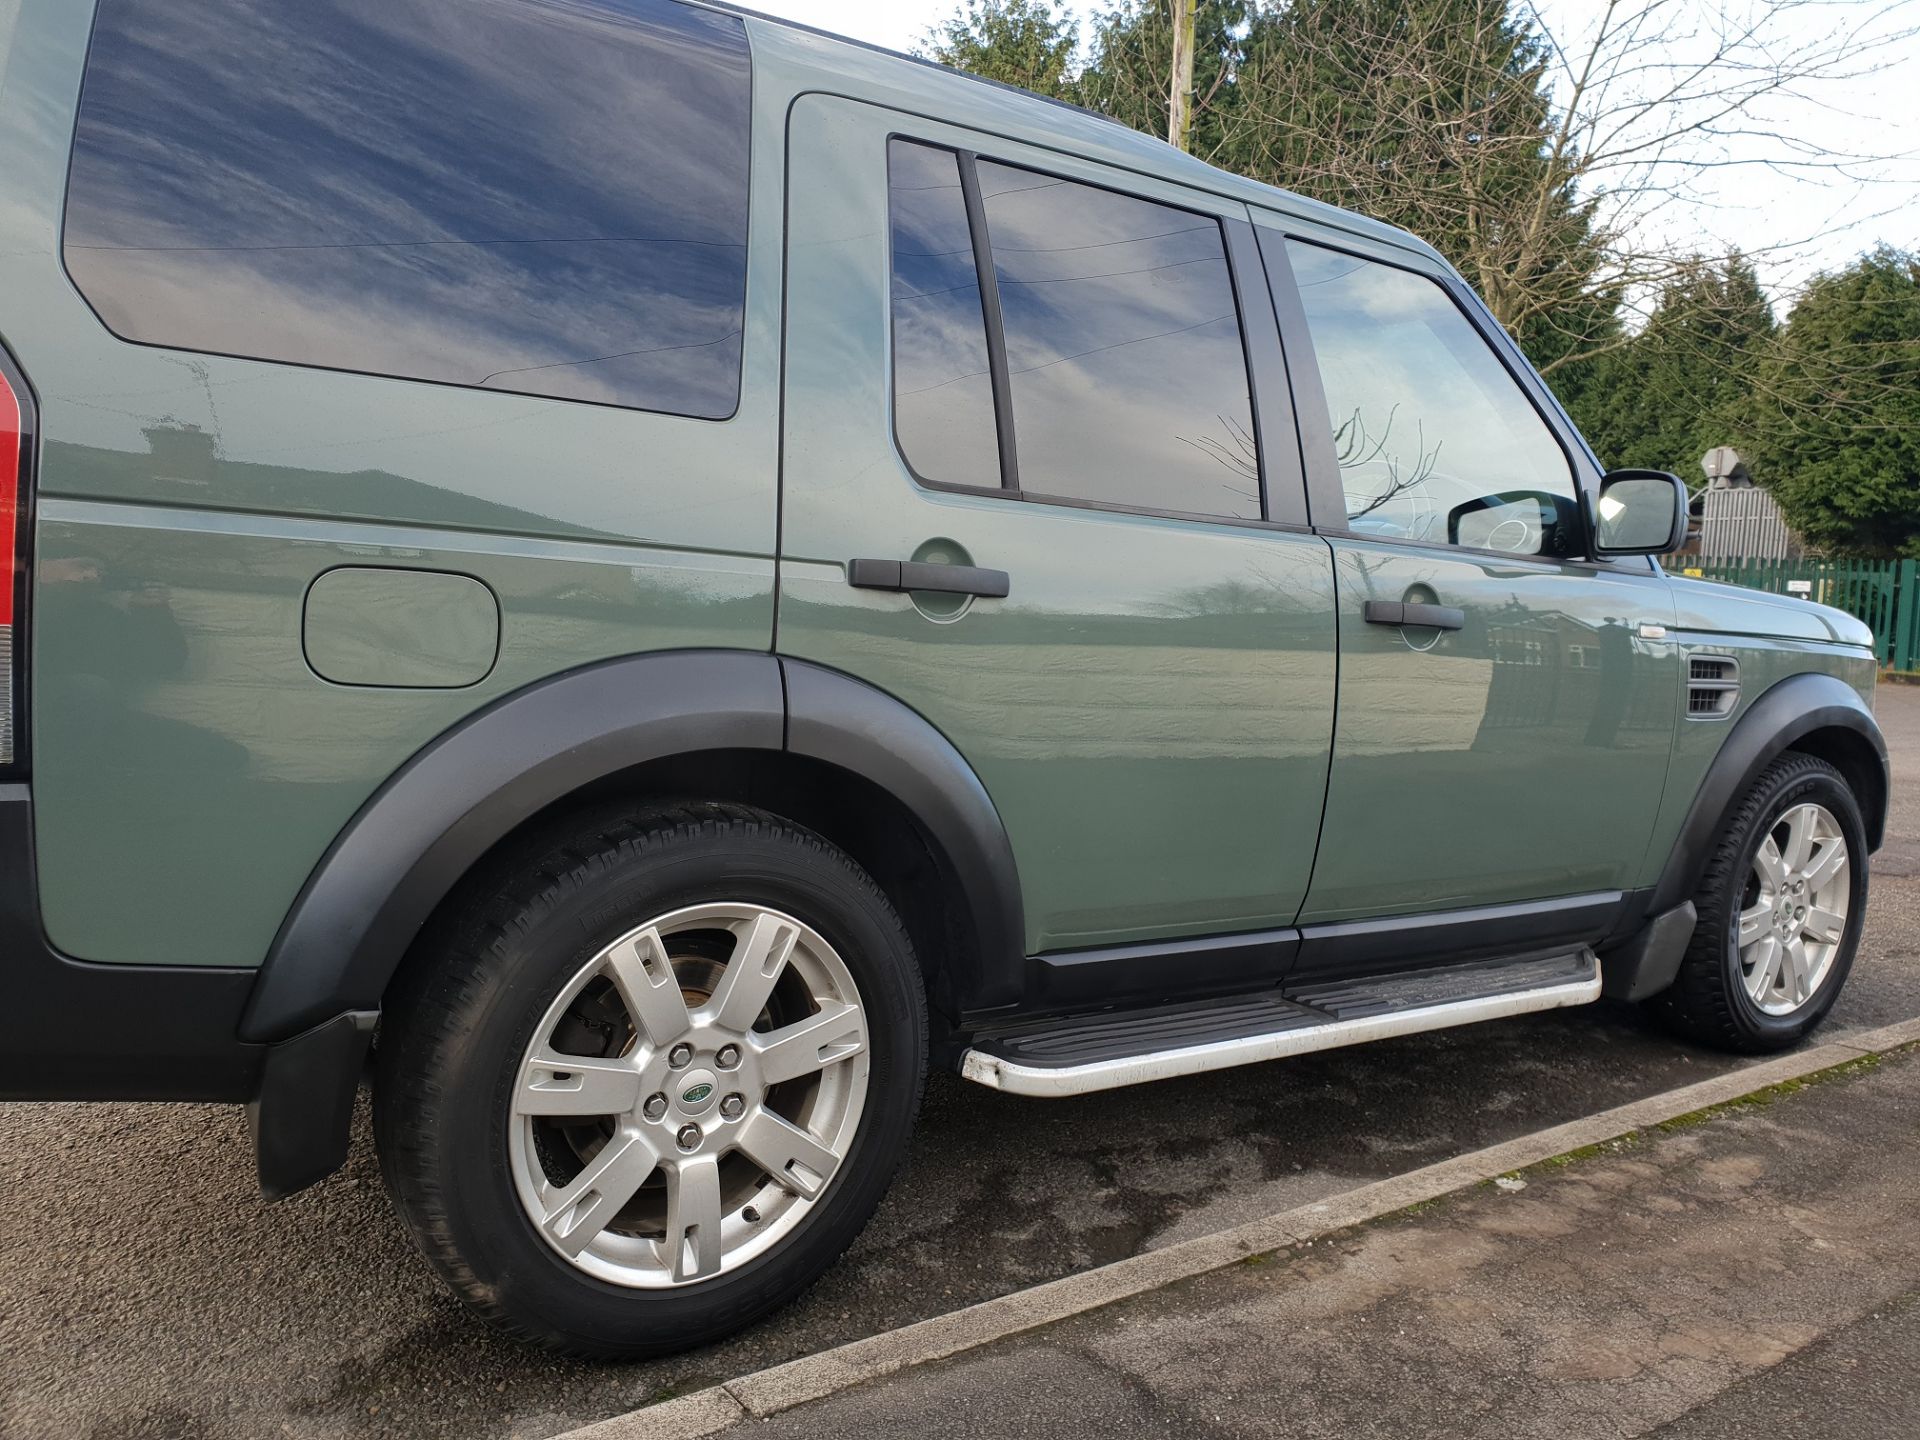 2009/09 REG LAND ROVER DISCOVERY 3 XS MWB DIESEL 4X4, ACTIVE REAR LOCKING DIFF, TOW PACK *PLUS VAT* - Image 7 of 16